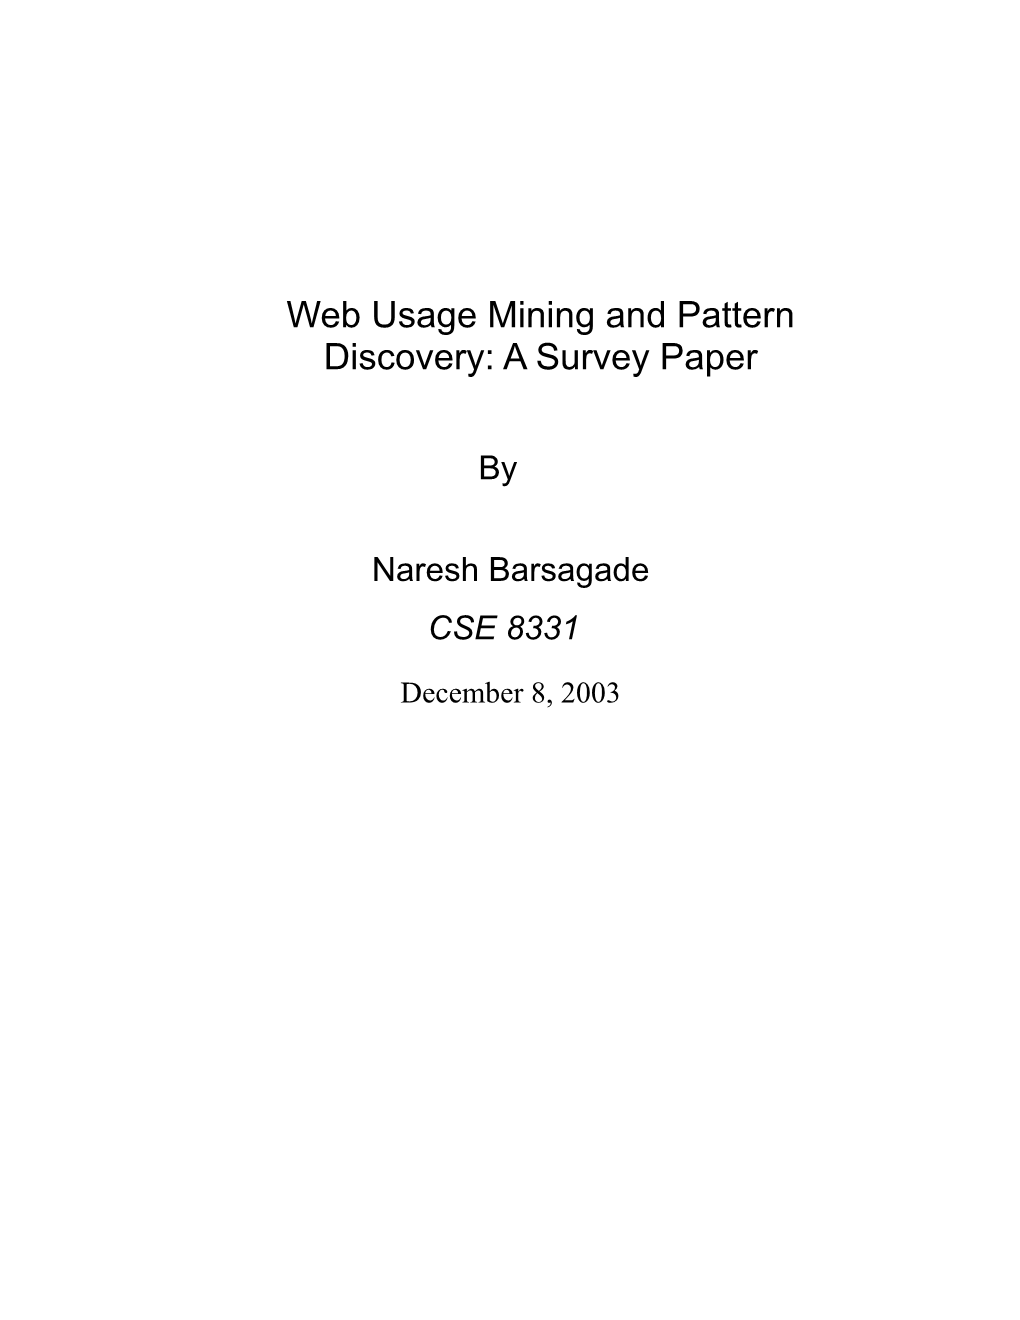 Web Usage Mining and Pattern Discovery: a Survey Paper